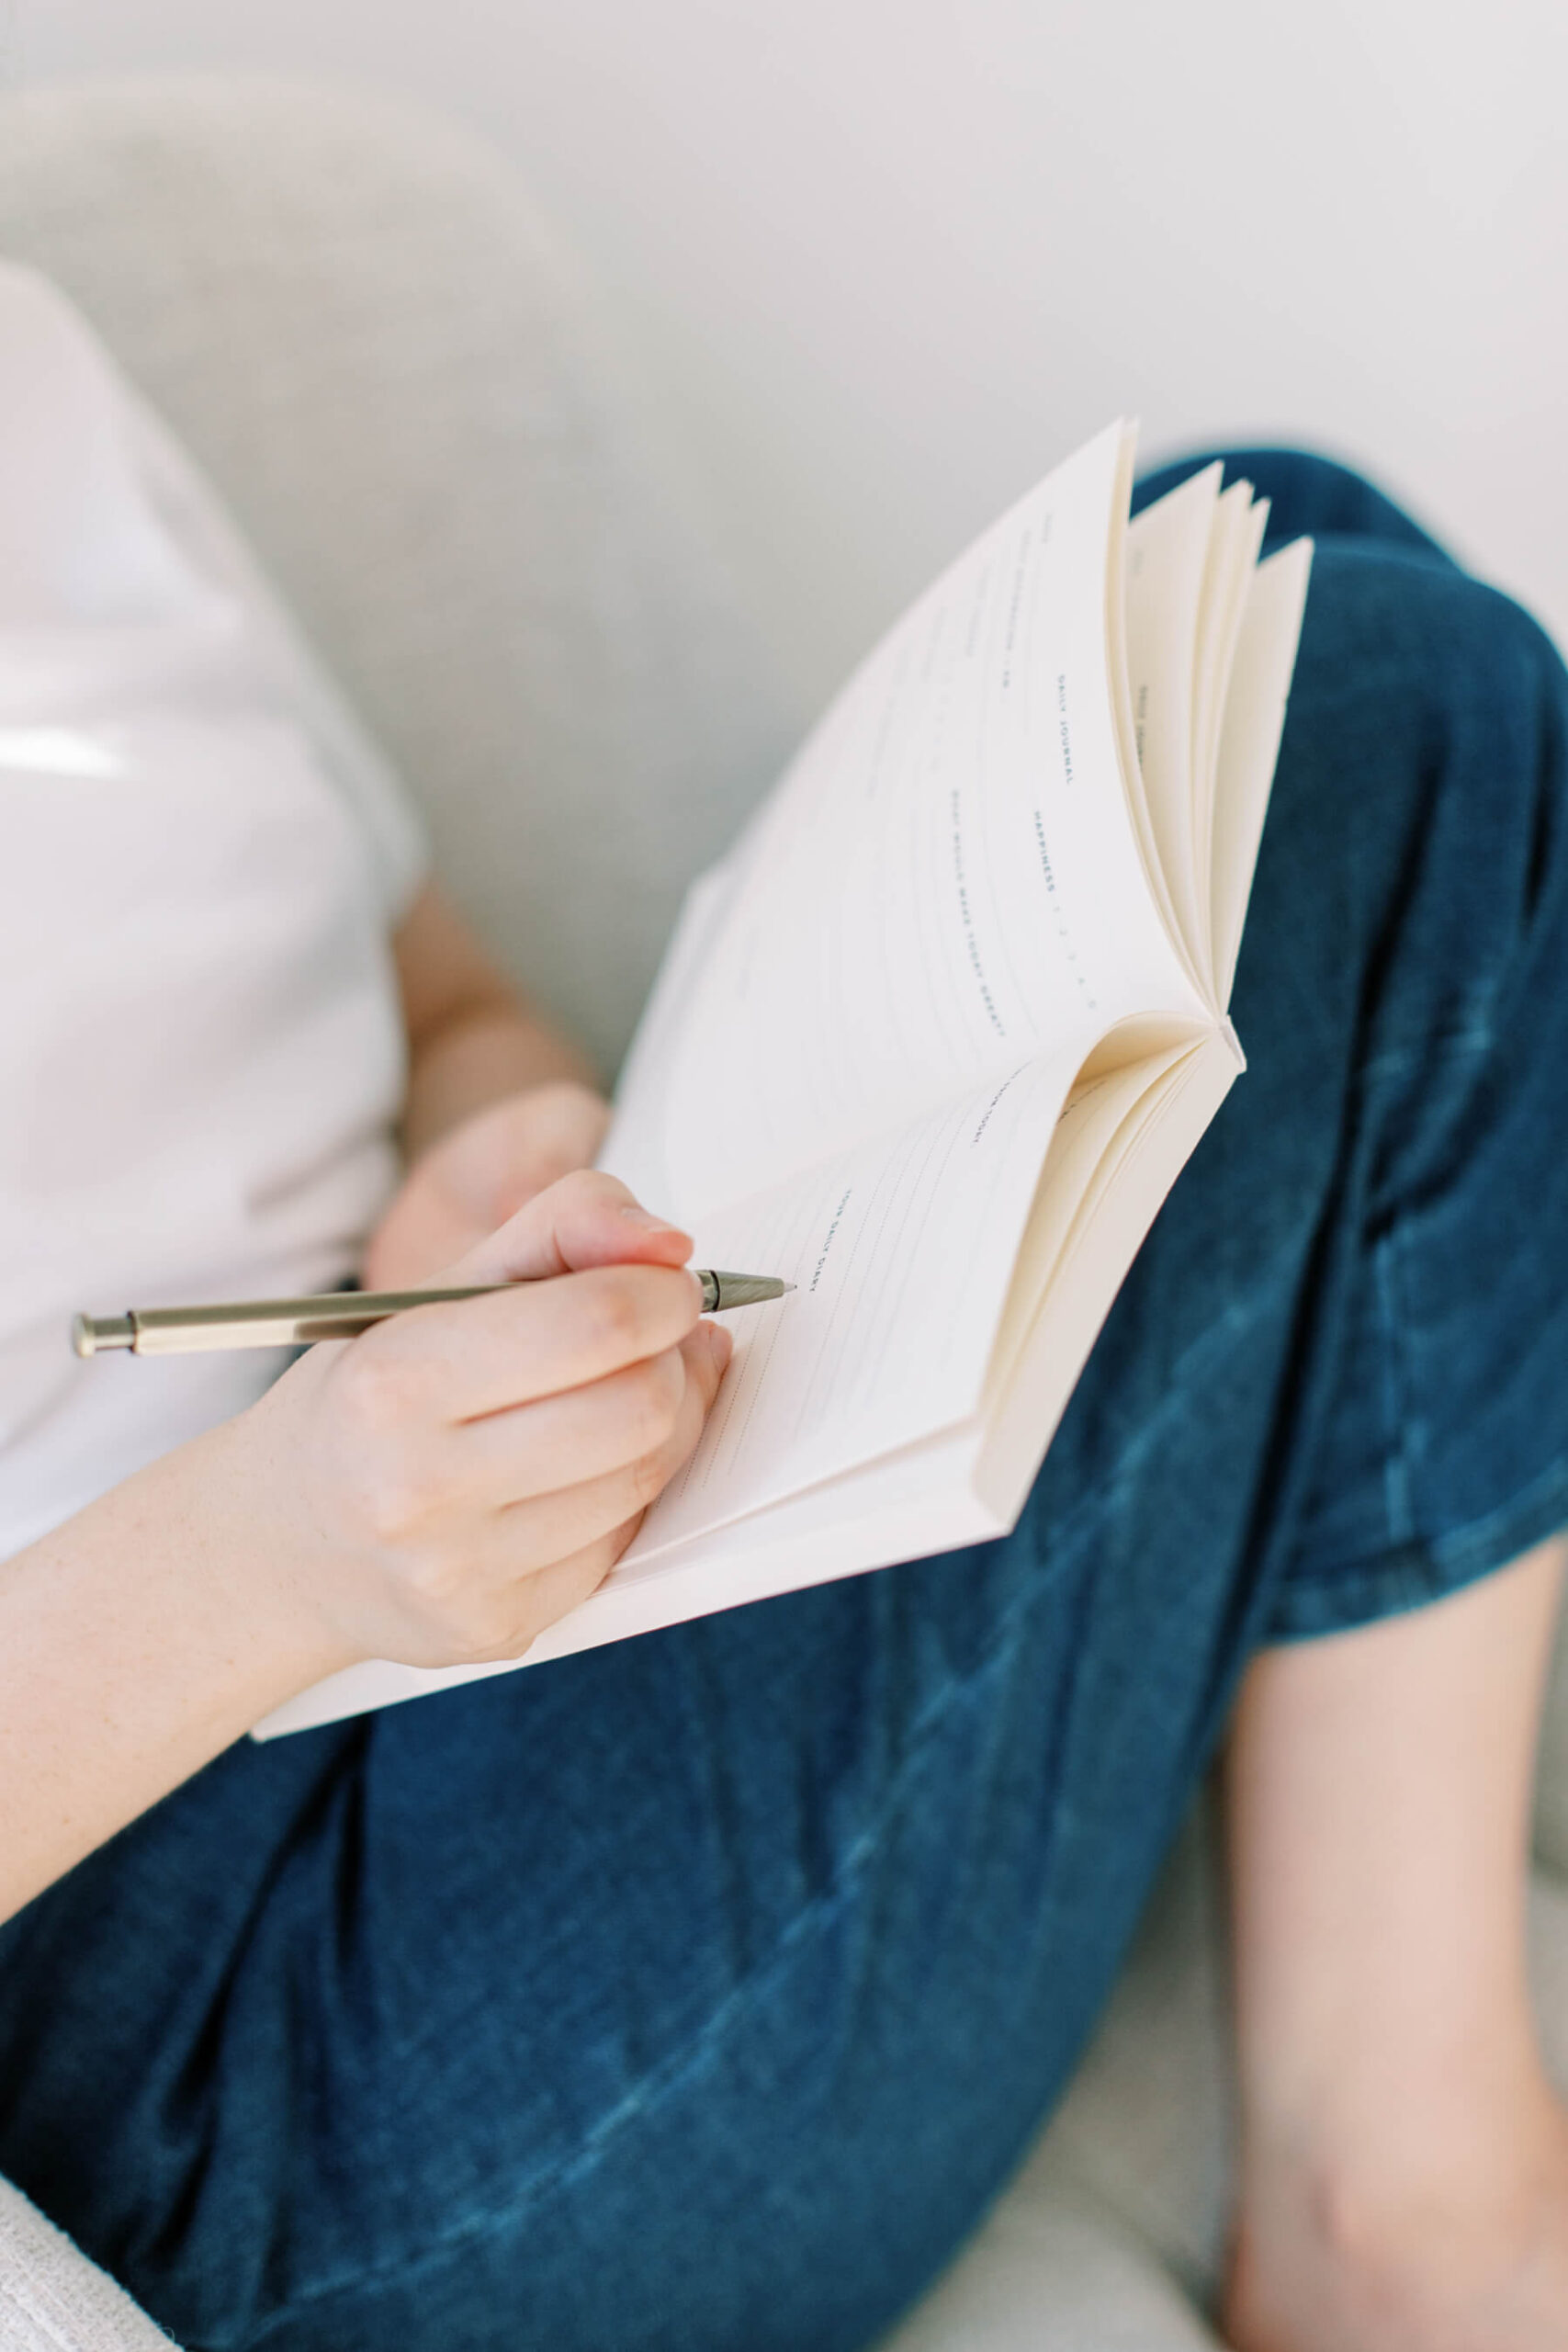 woman writing in a notebook wearing jeans